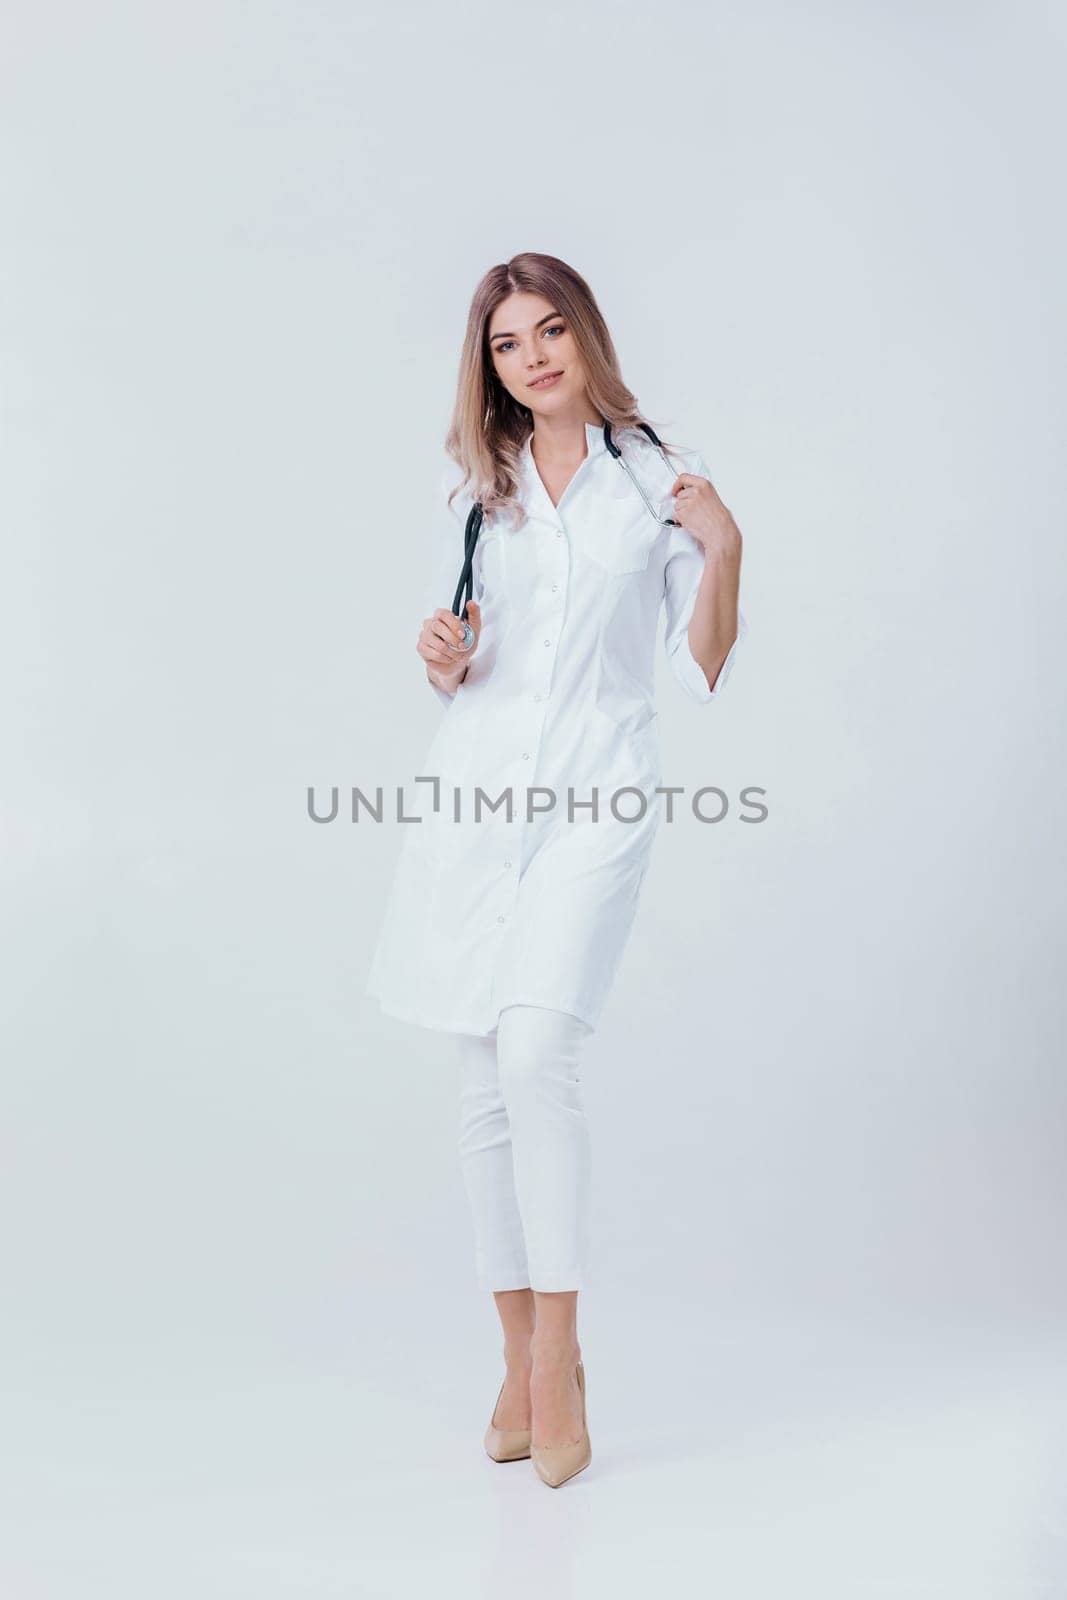 Full length portrait of medical physician doctor woman in white coat with stethoscope looks at camera on light background.